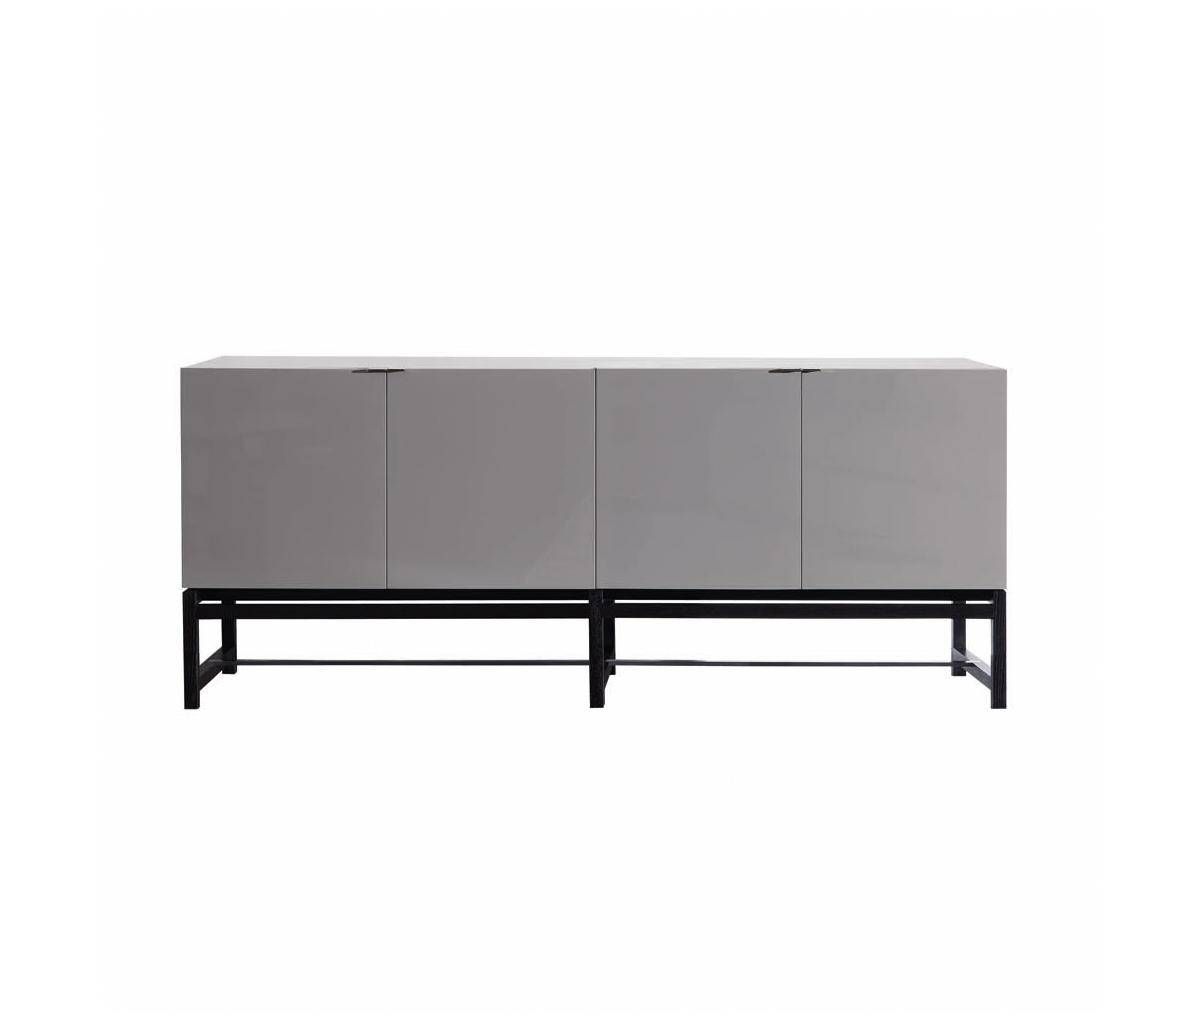 Harvey – Sideboards From Minotti | Architonic Regarding Most Recently Released Harveys Sideboards (View 15 of 15)